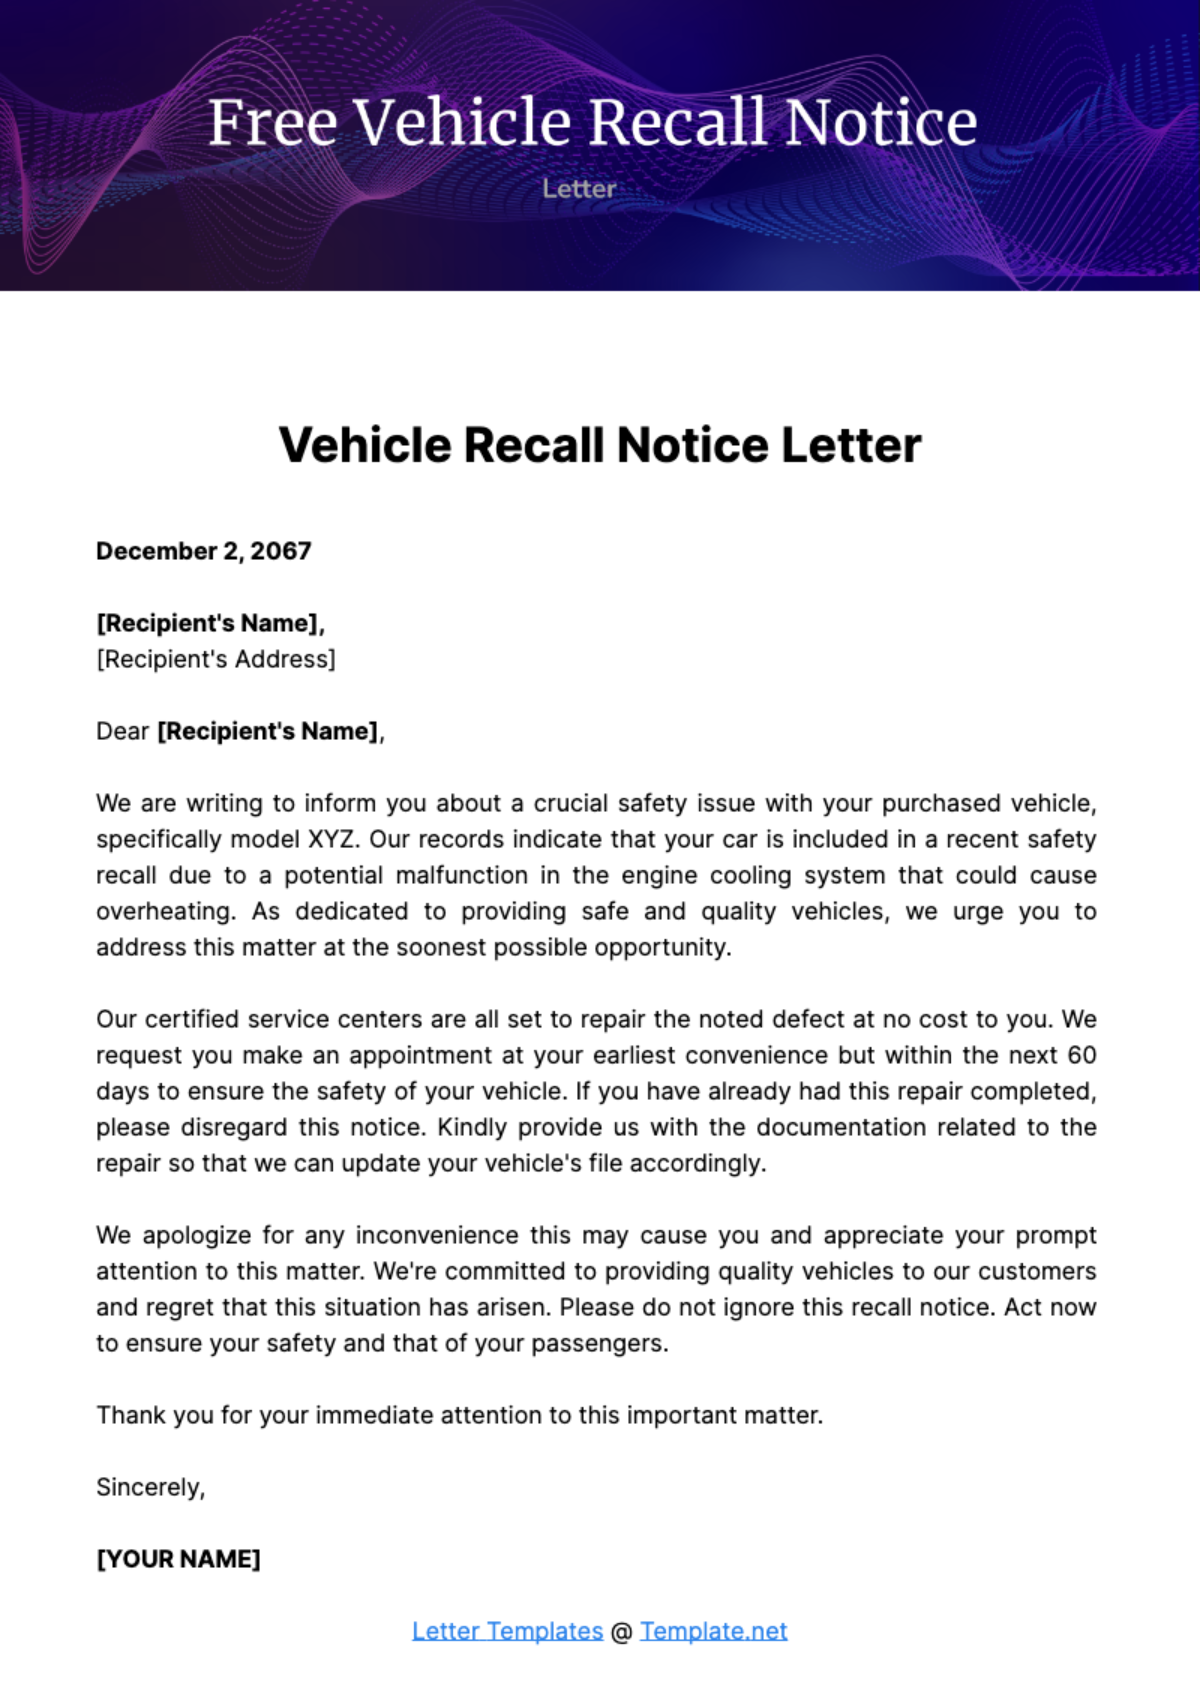 Free Vehicle Recall Notice Letter Template